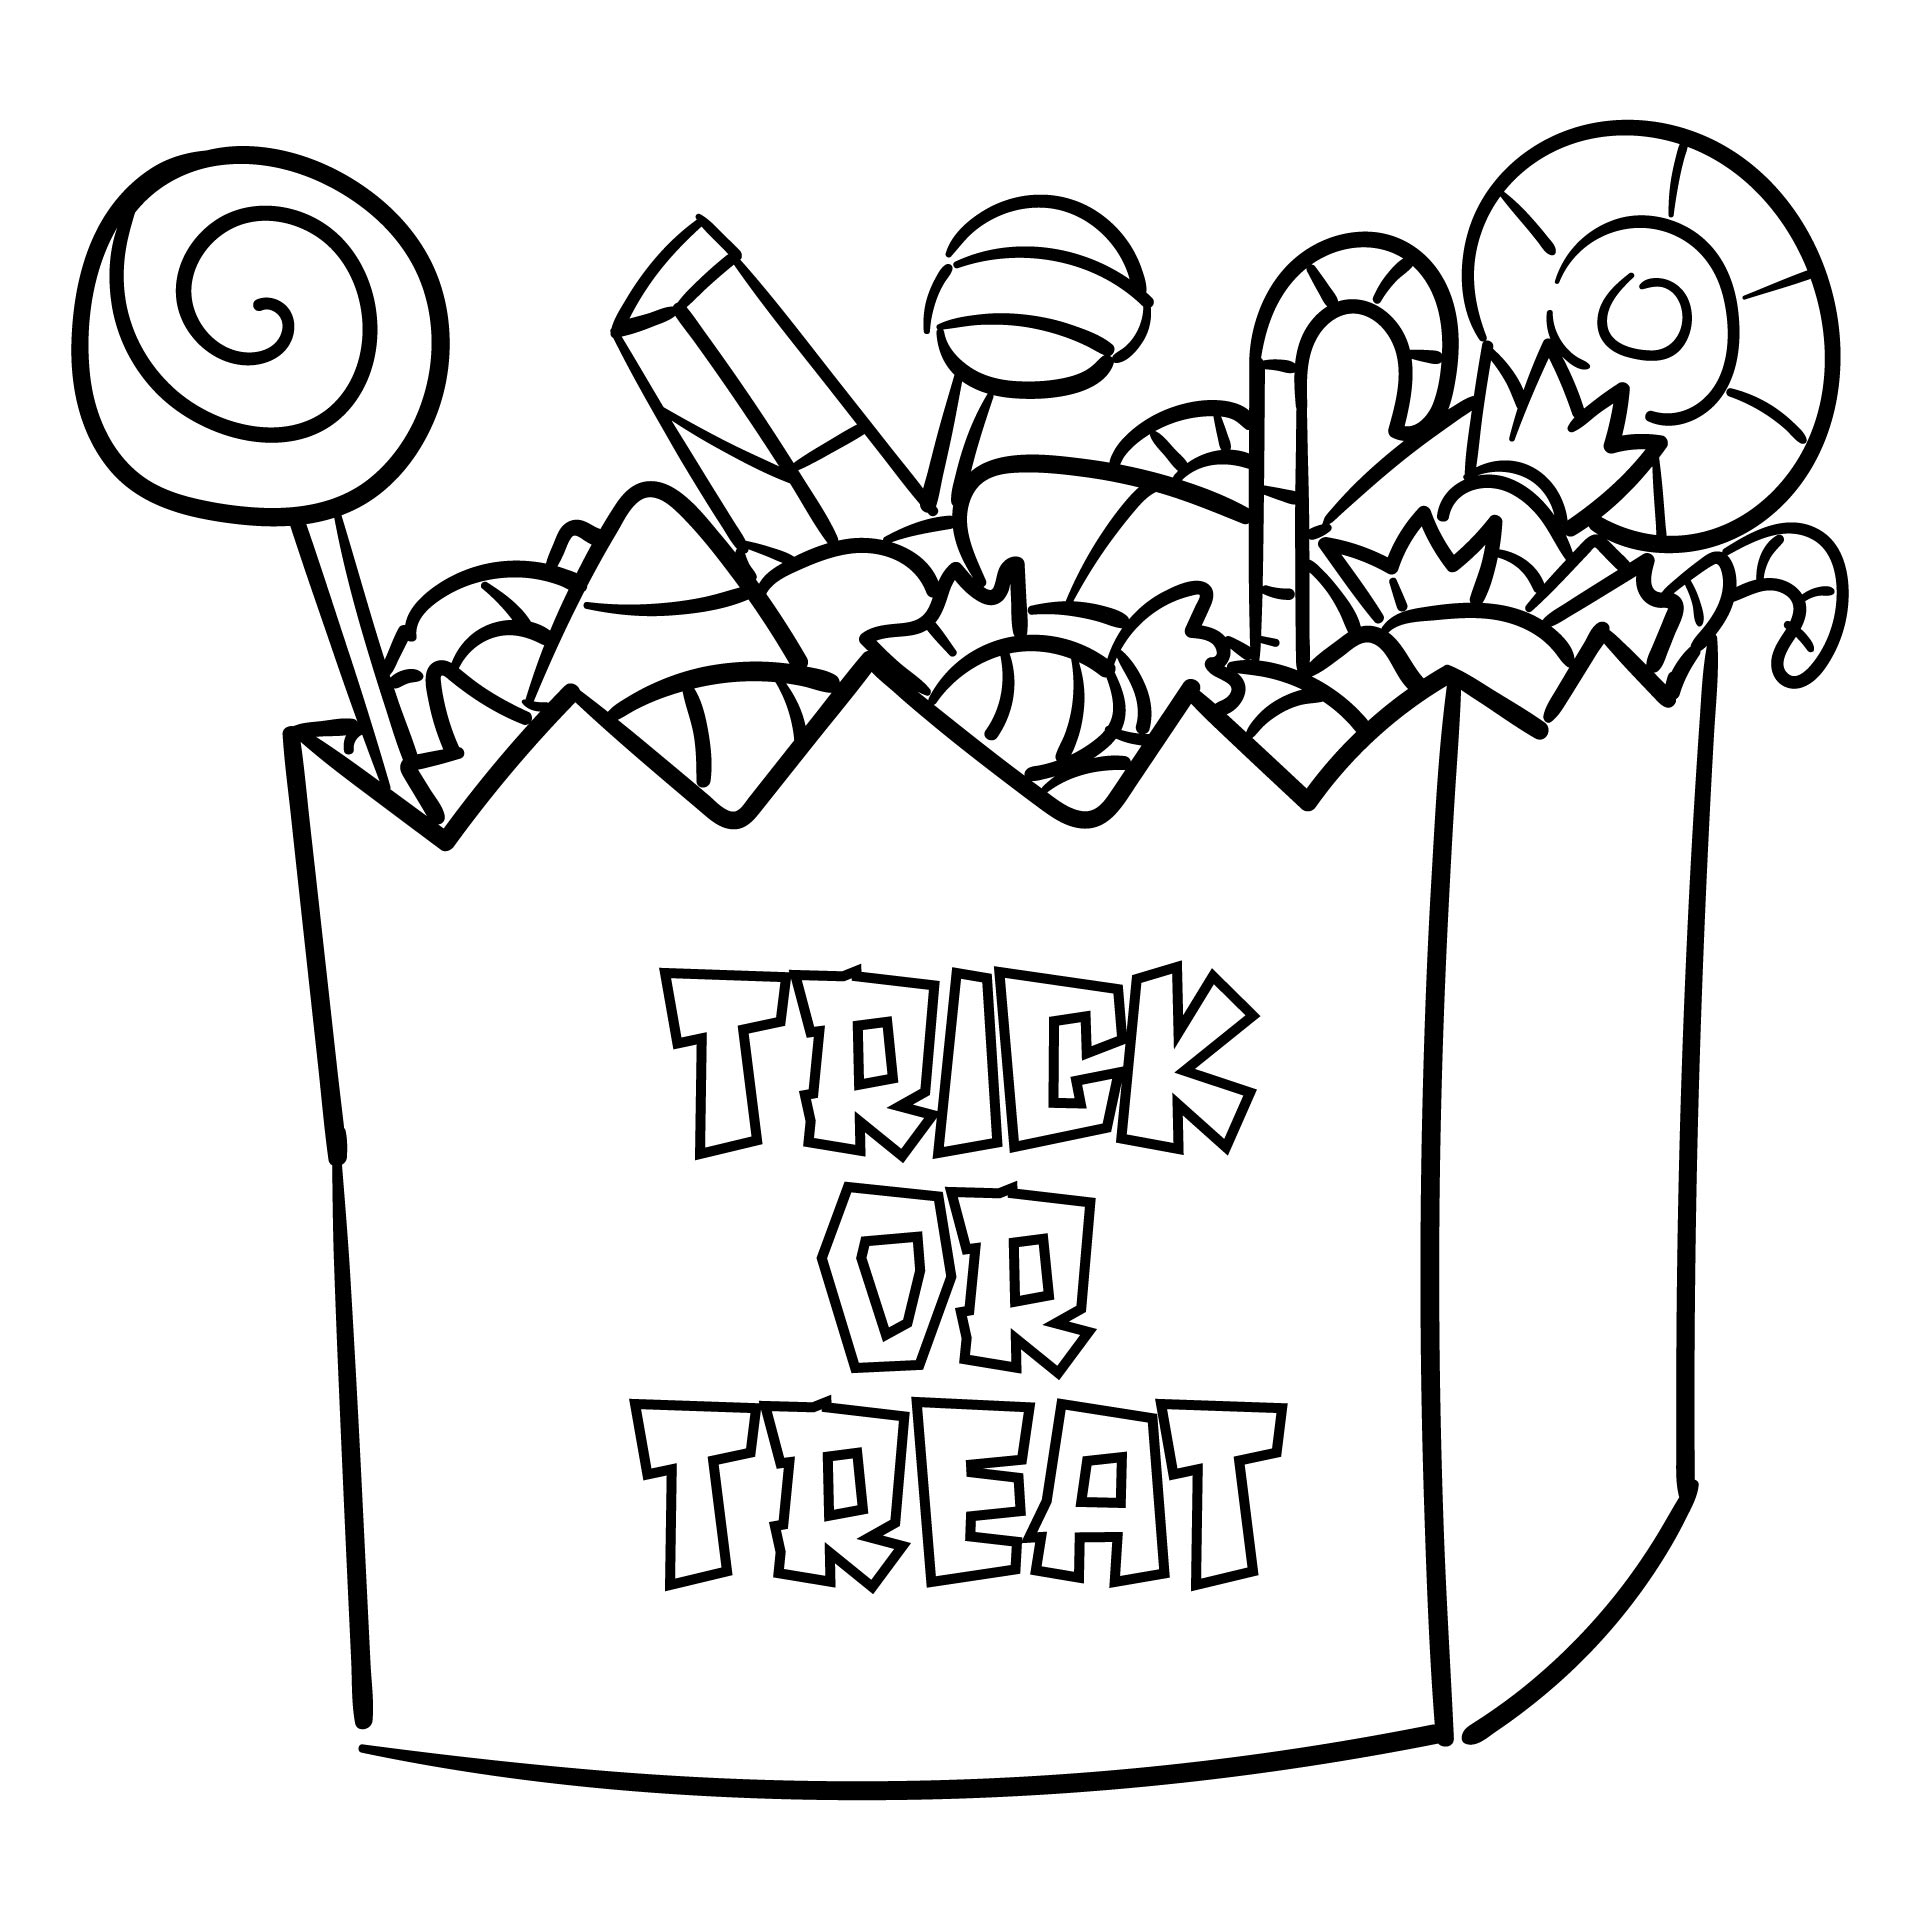 Halloween Candy Coloring Pages - 15 Free PDF Printables | Printablee